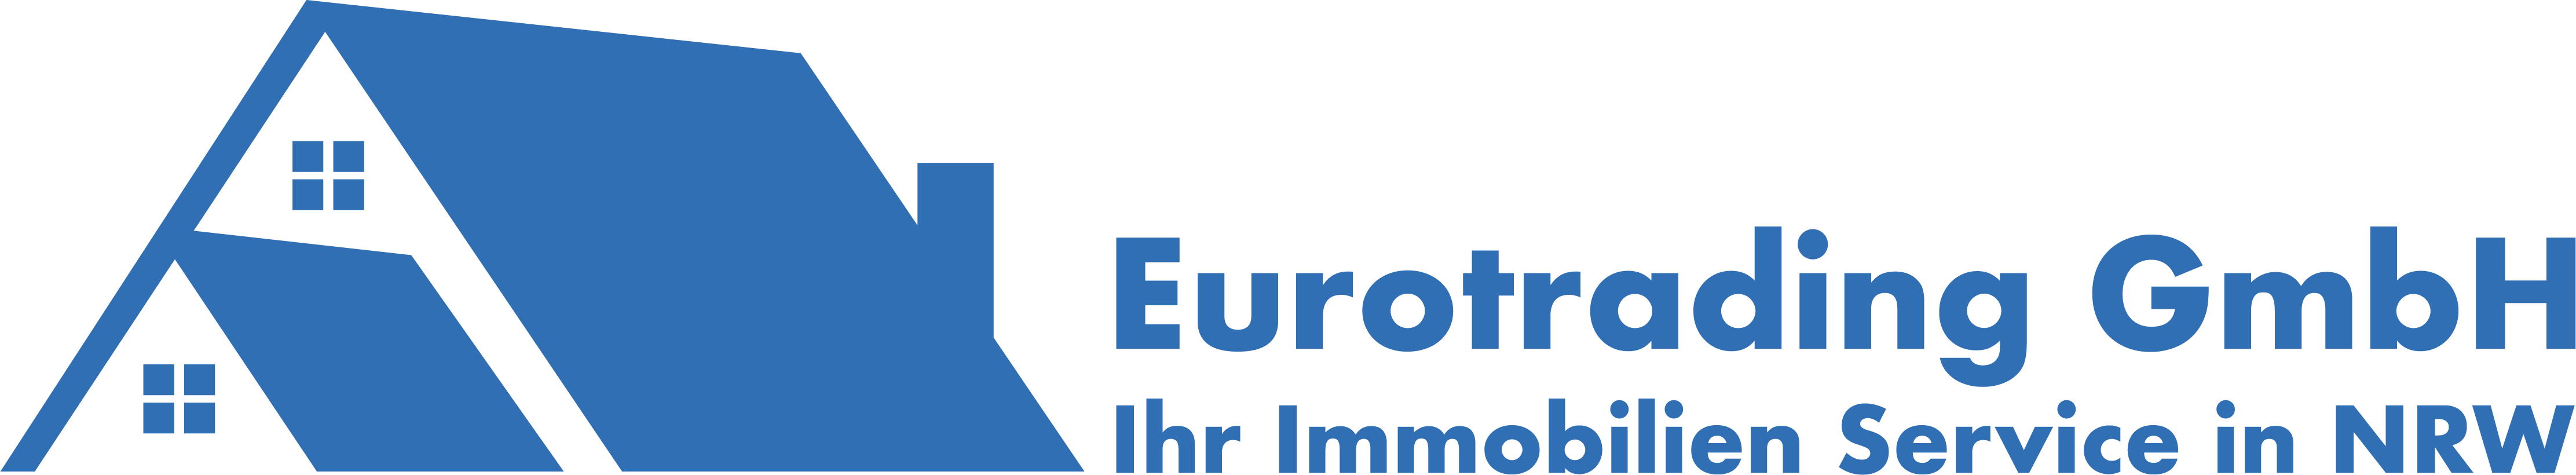 Eurotrading Immobilien Service GmbH